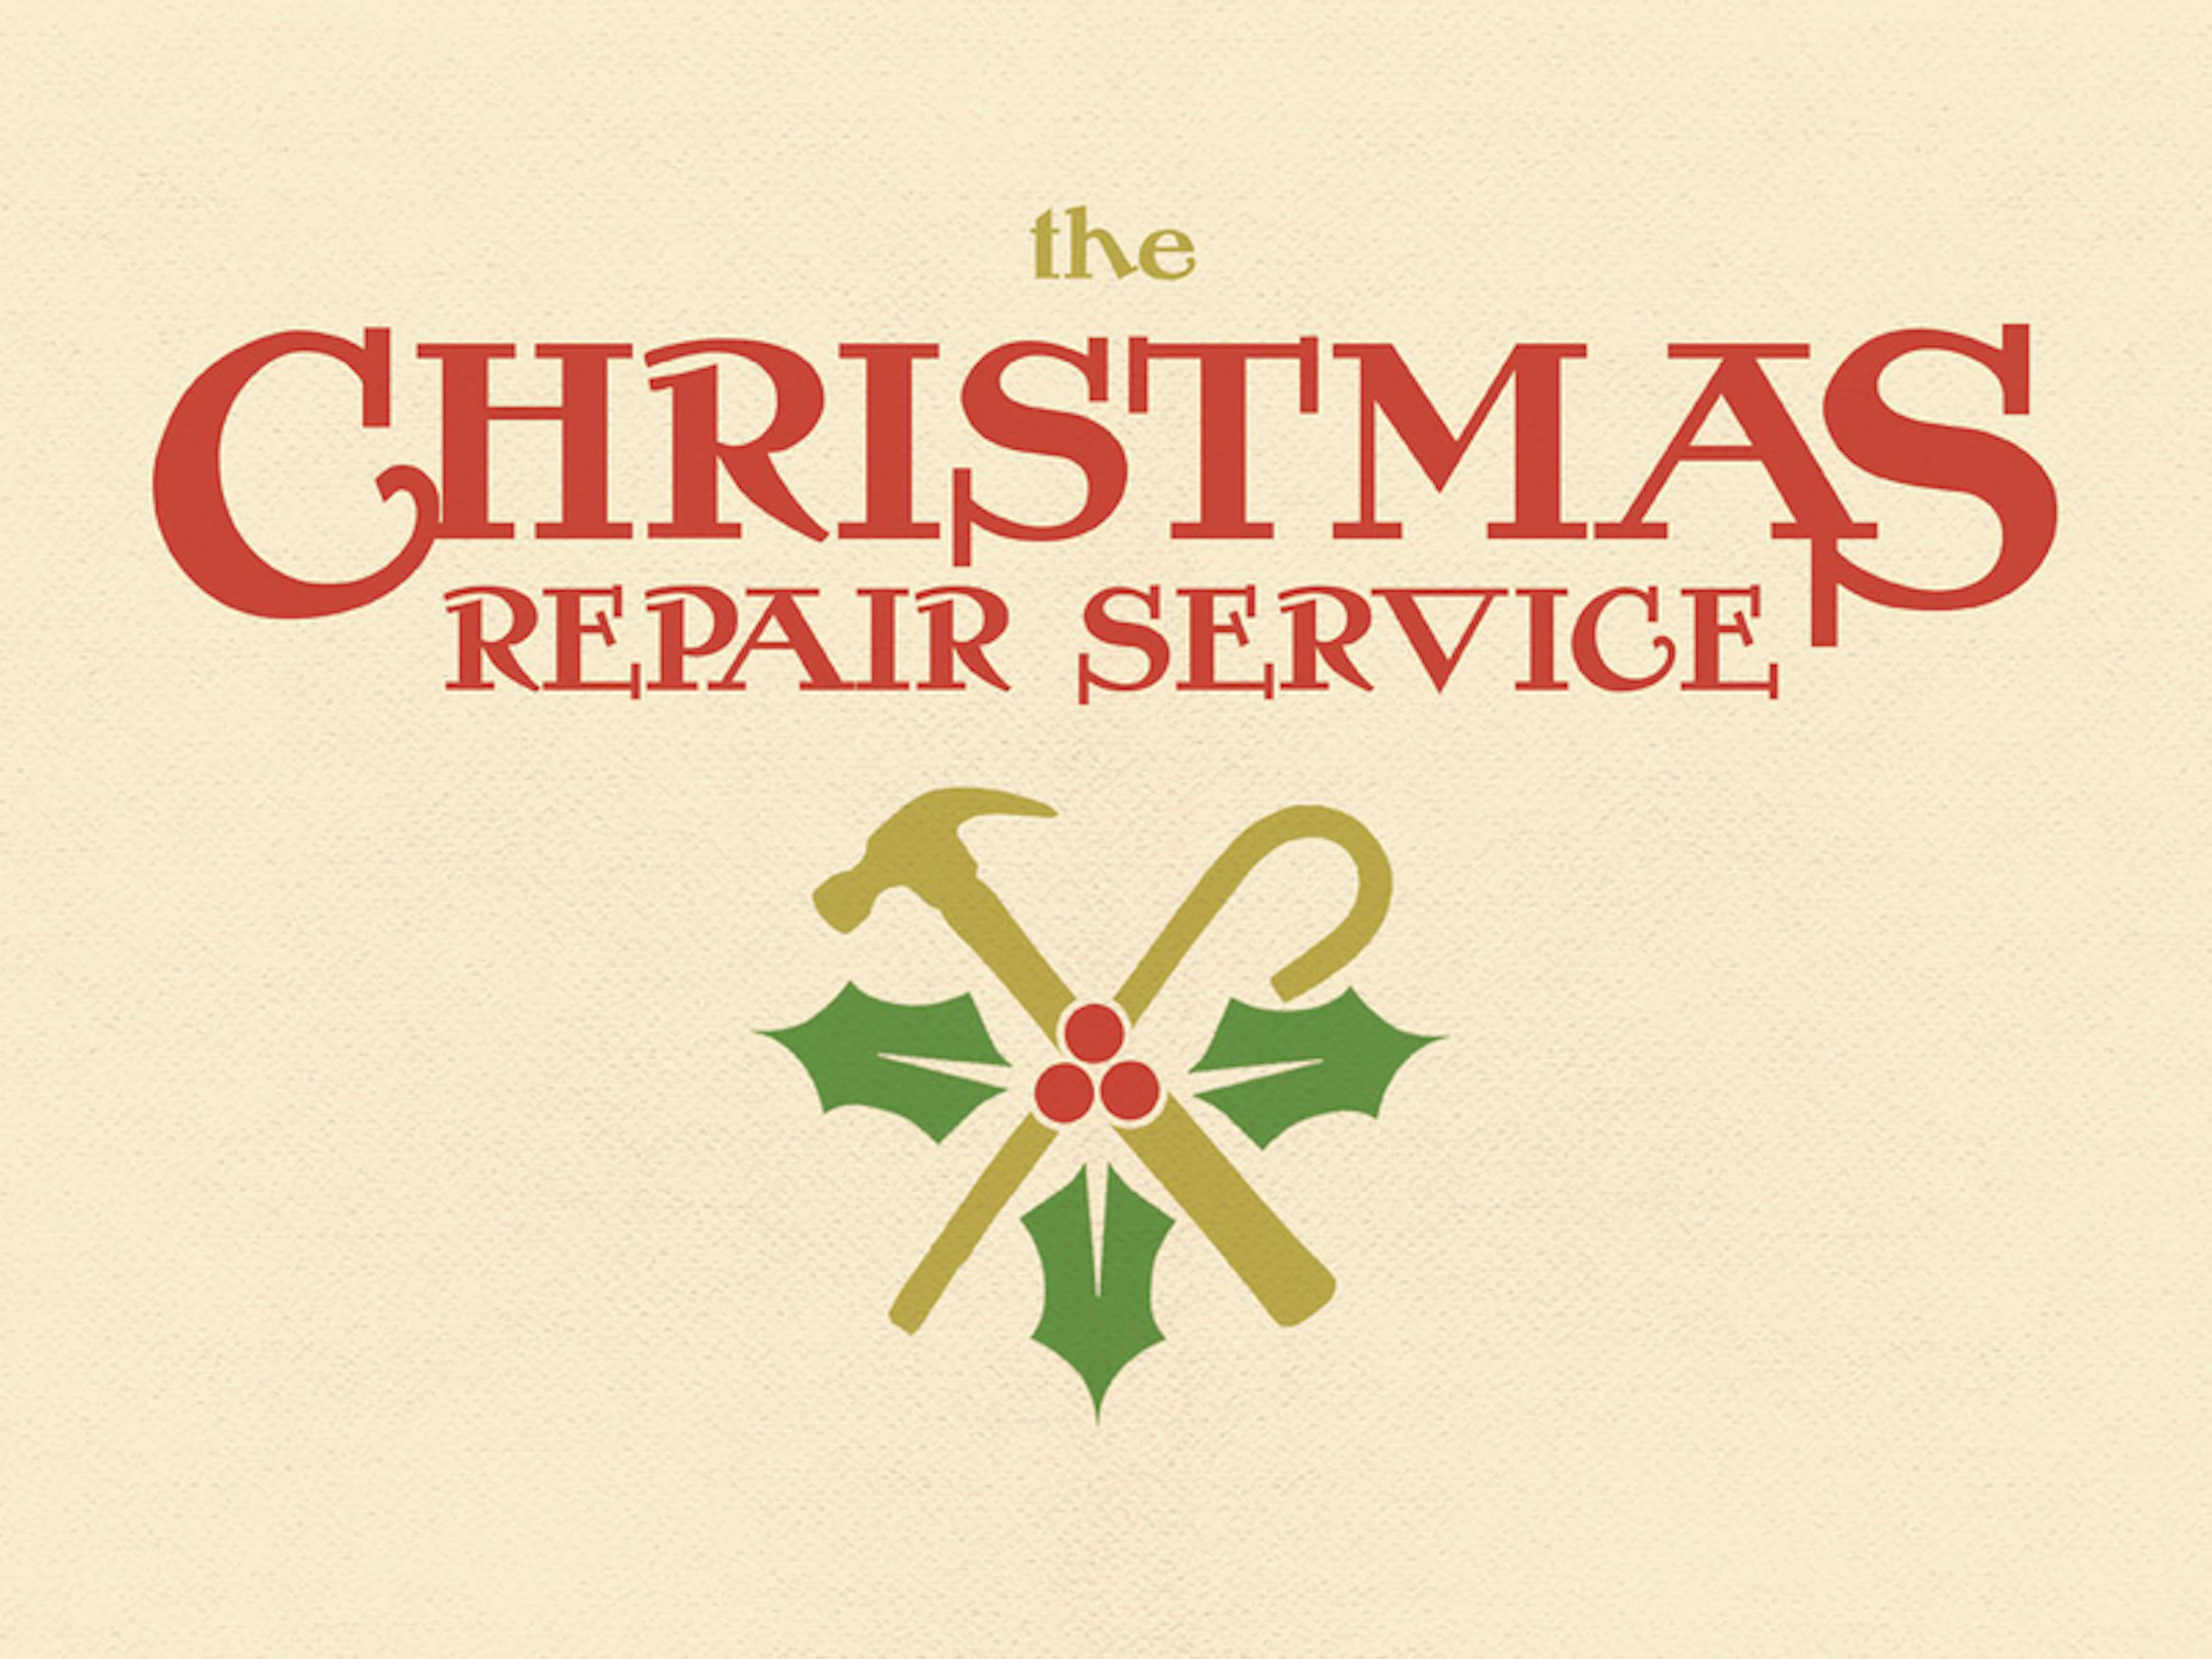 Story: "The Christmas Repair Service"